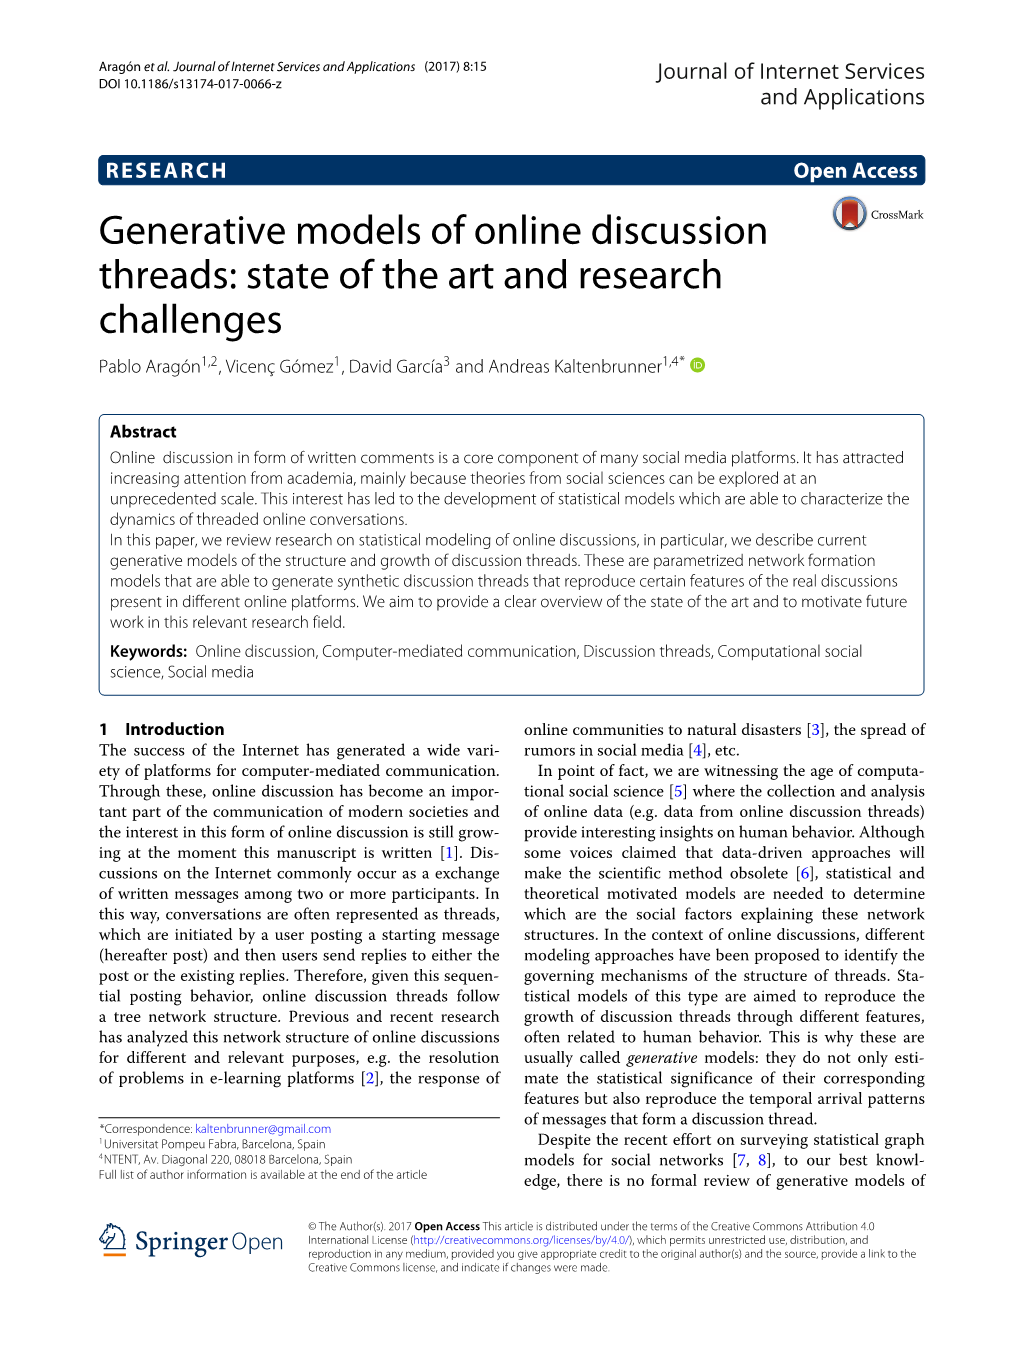 Generative Models of Online Discussion Threads: State of the Art and Research Challenges Pablo Aragón1,2, Vicenç Gómez1, David García3 and Andreas Kaltenbrunner1,4*